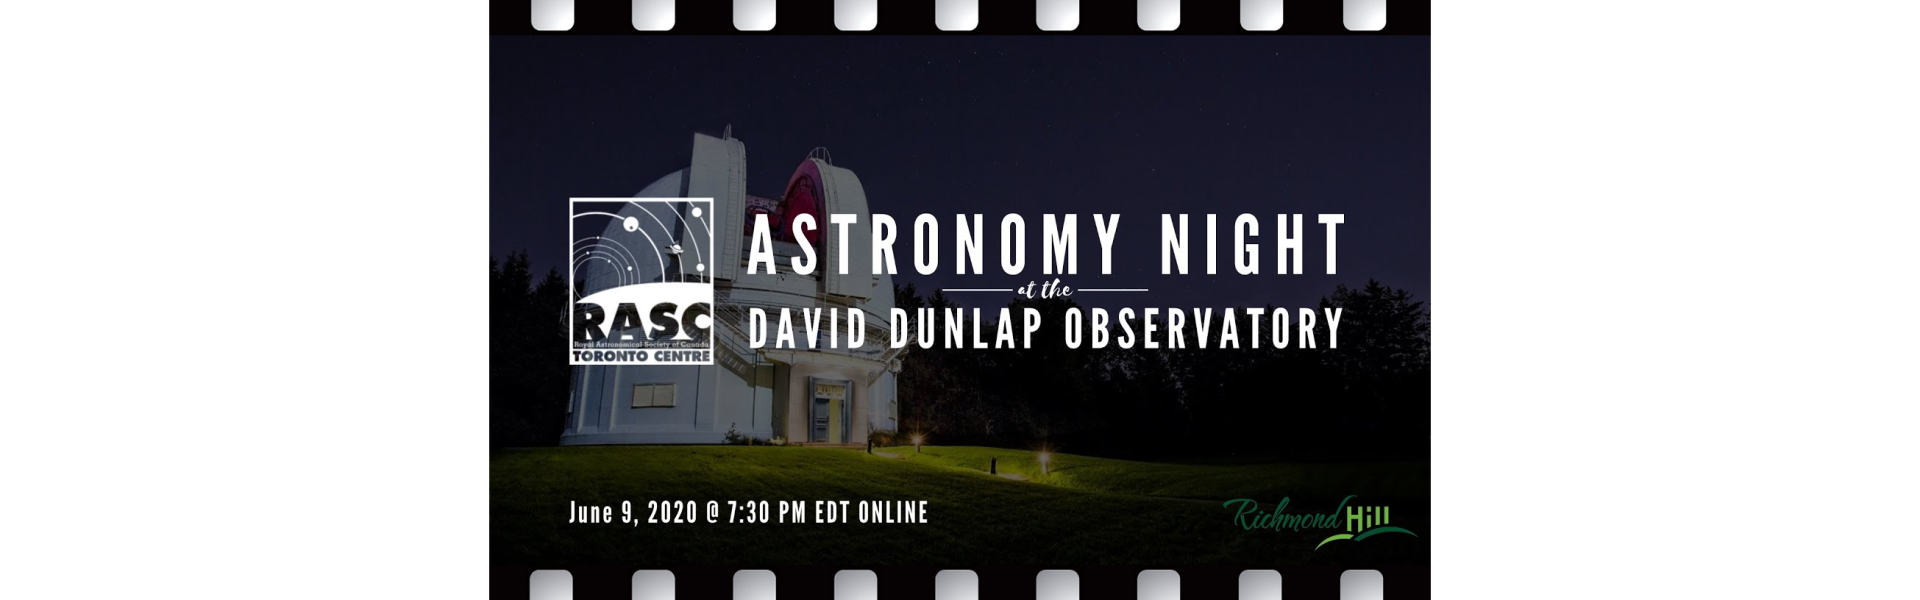 Astronomy Night at the DDO